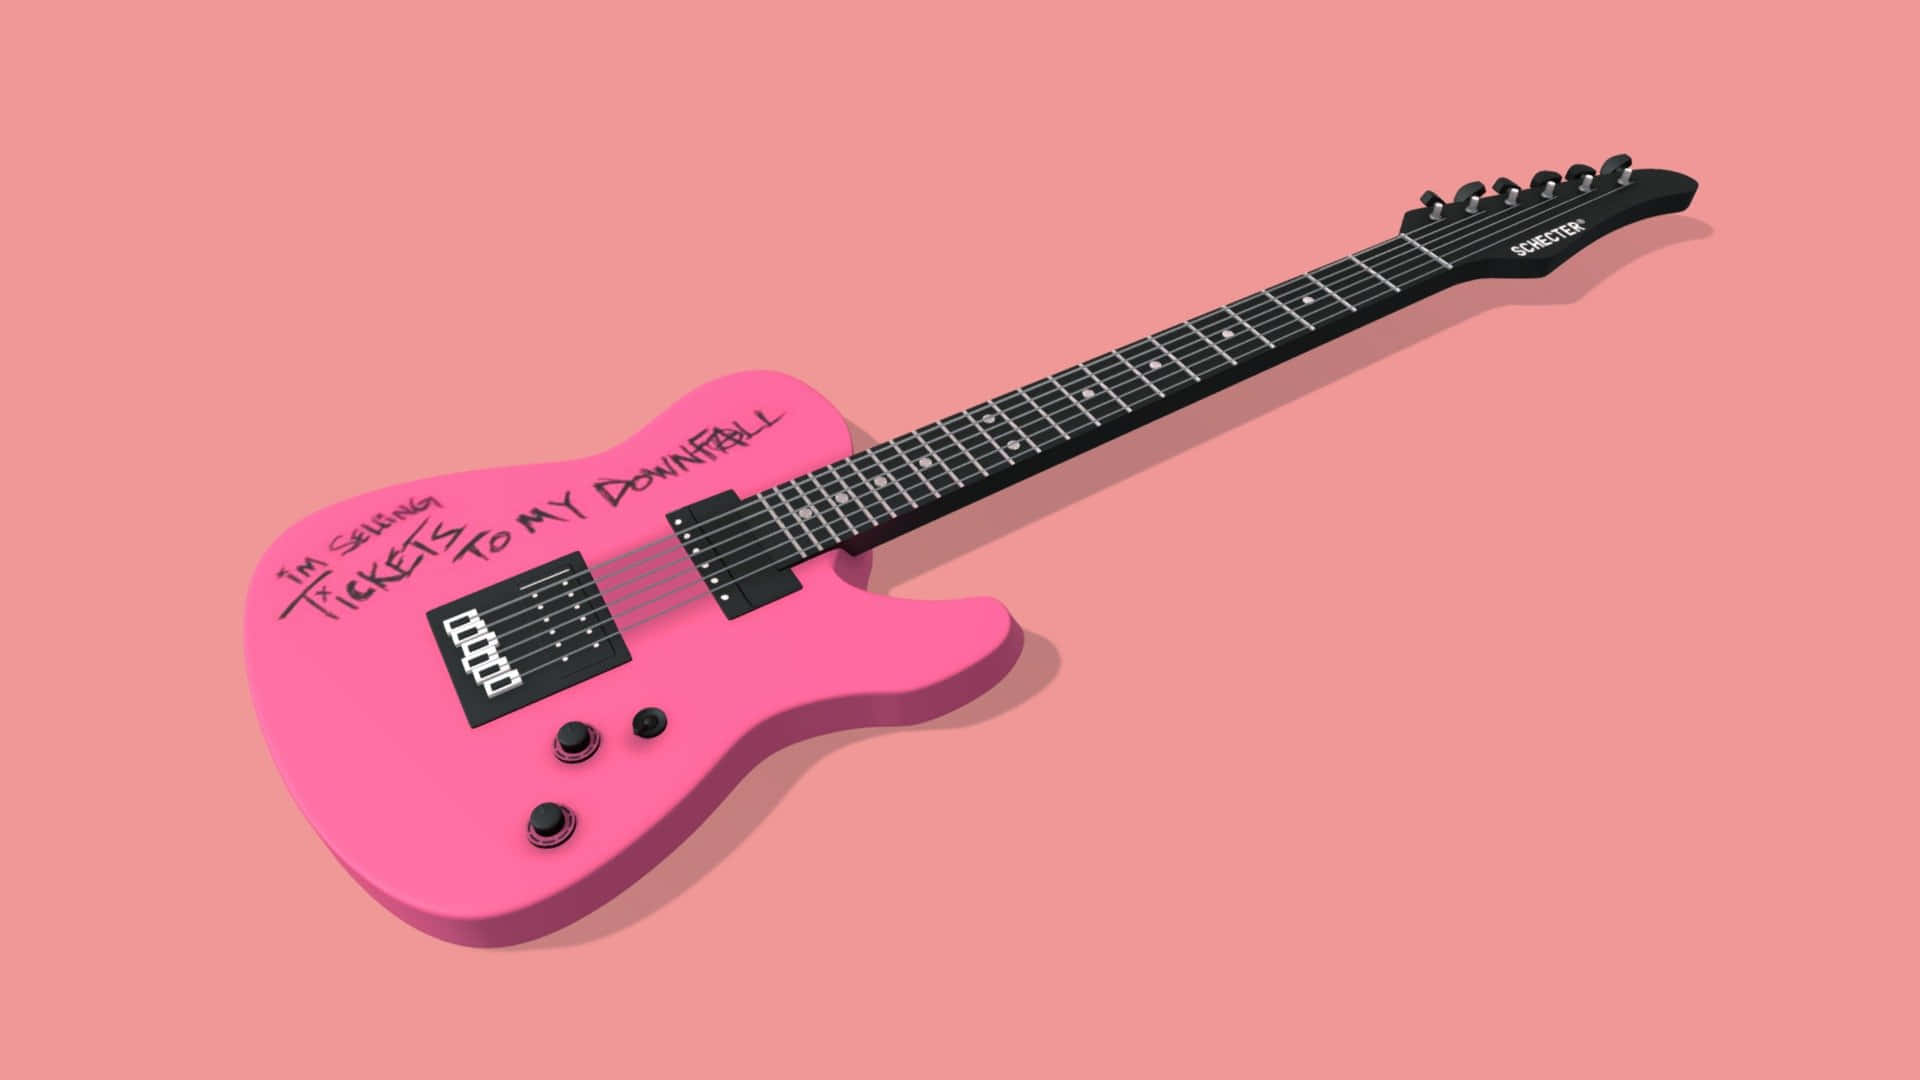 Tickets To My Downfall Pink Aesthetic Guitar Wallpaper